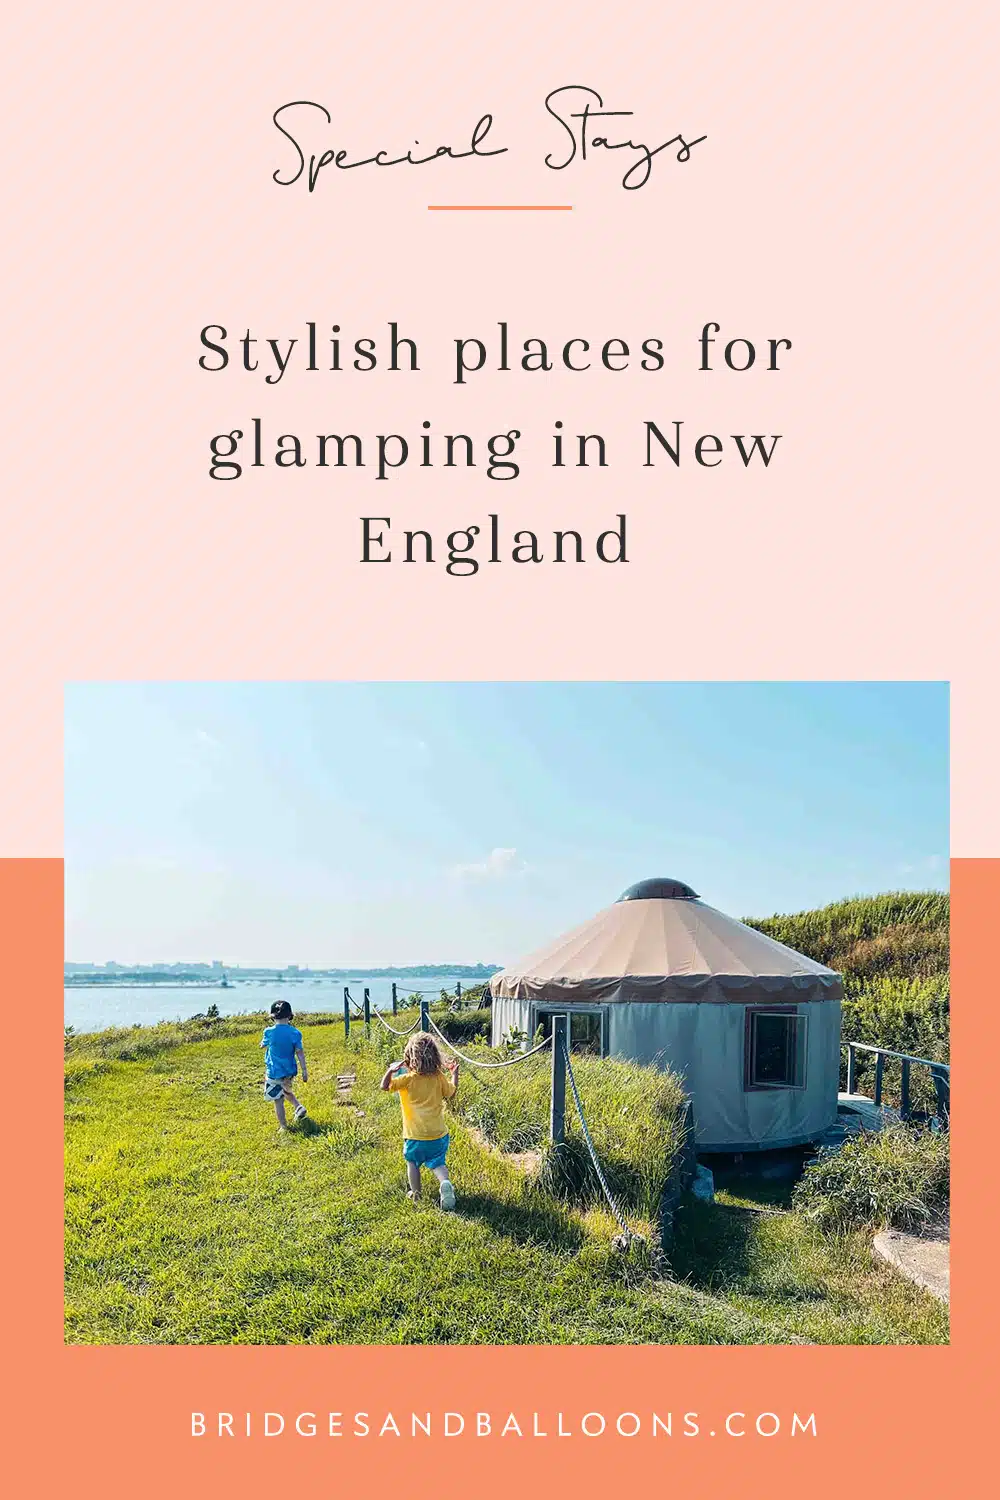 Stylish places for glamping in New England